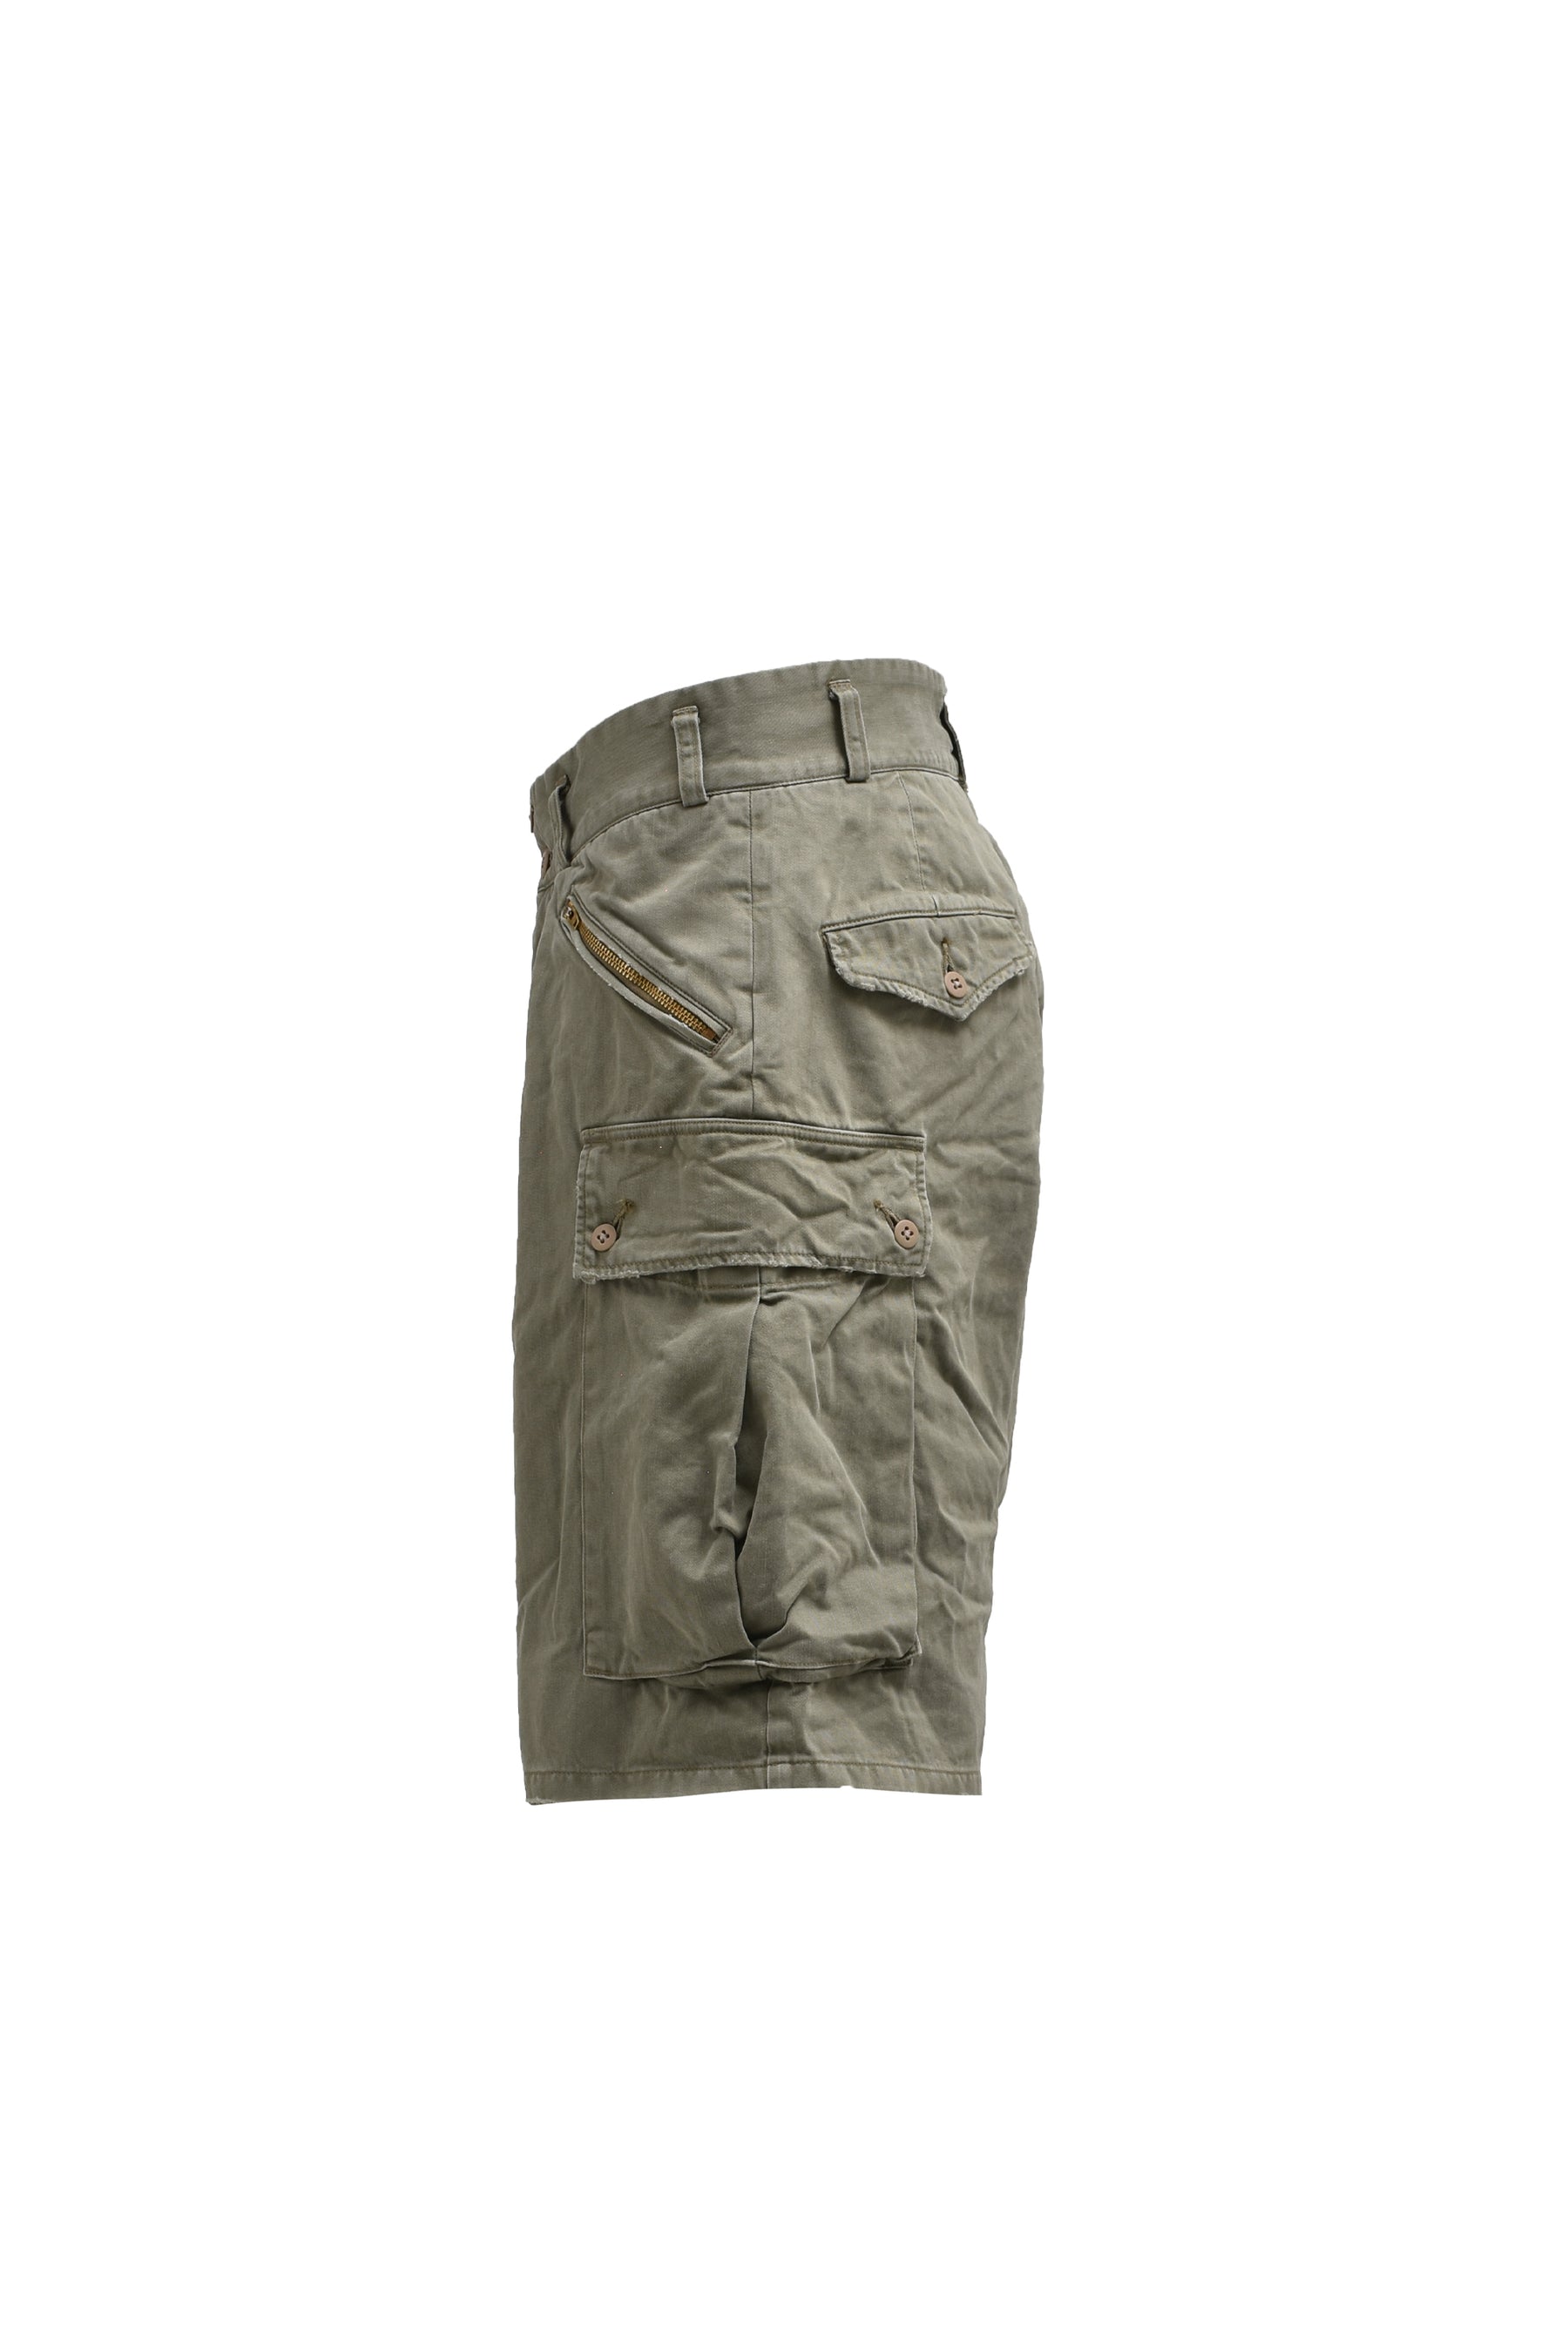 US ARMY MOUNTAIN TROOPER SHORTS / OD AGEING